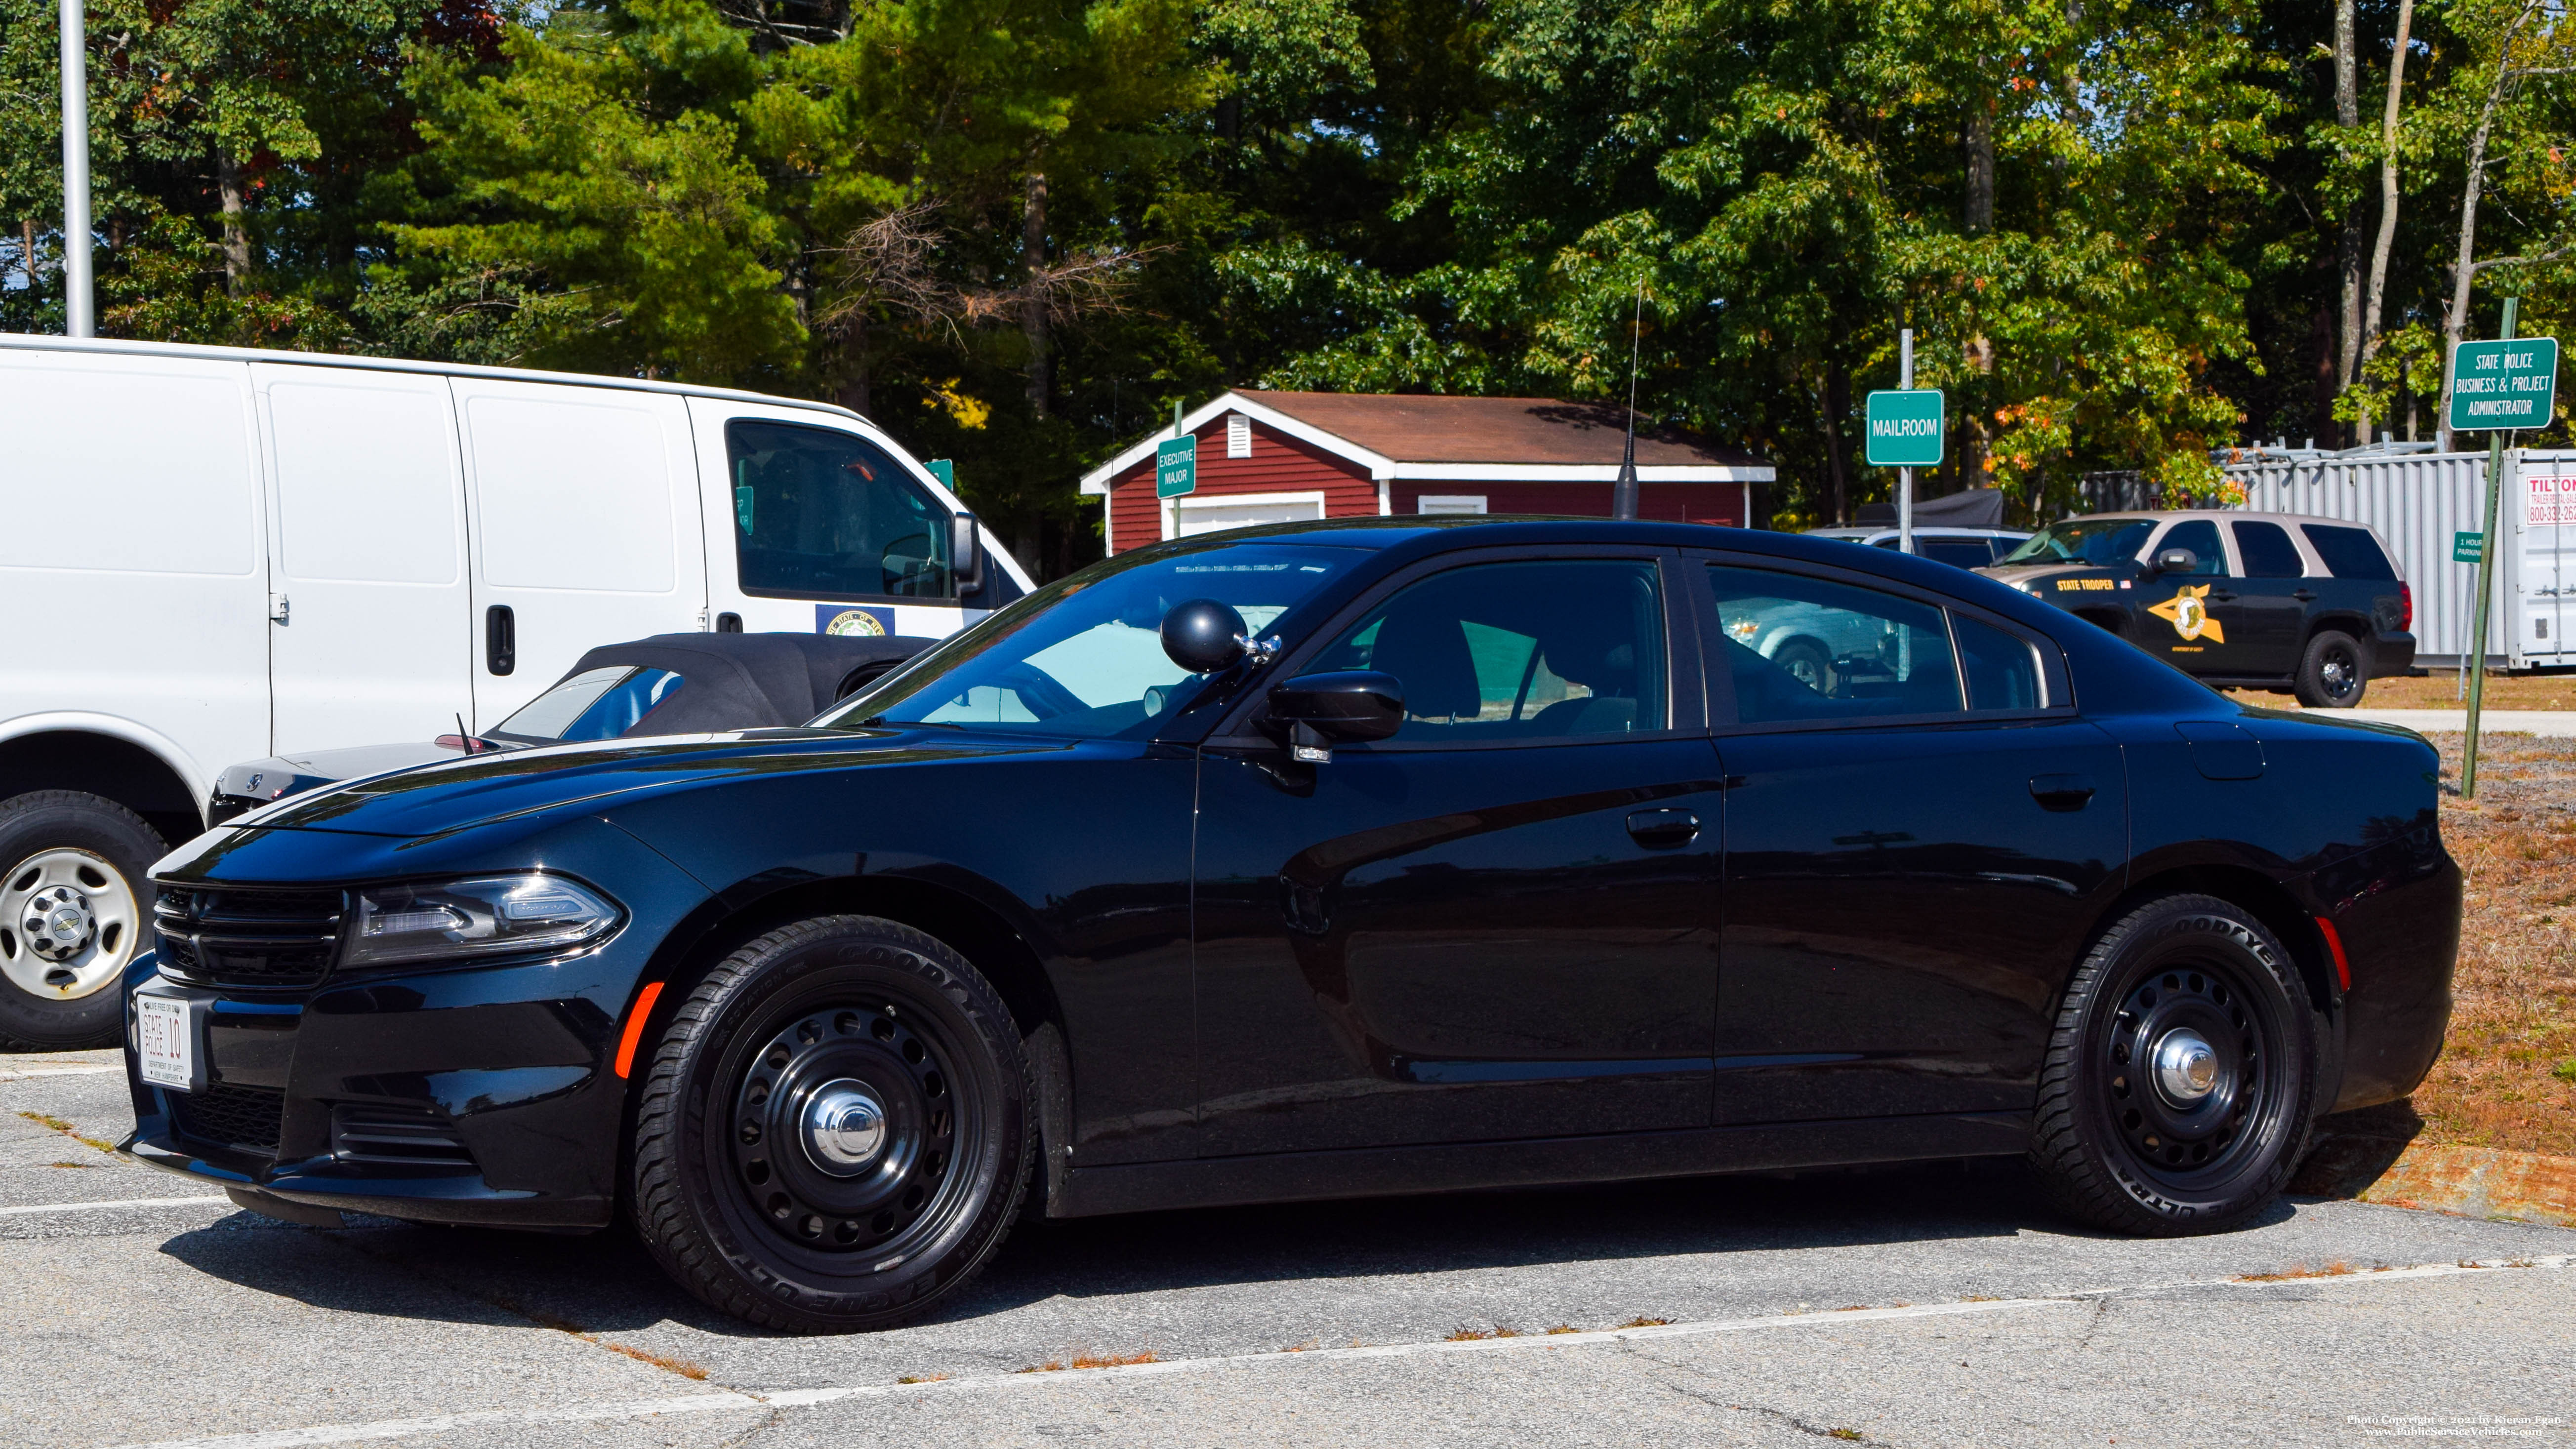 A photo  of New Hampshire State Police
            Cruiser 10, a 2017-2019 Dodge Charger             taken by Kieran Egan